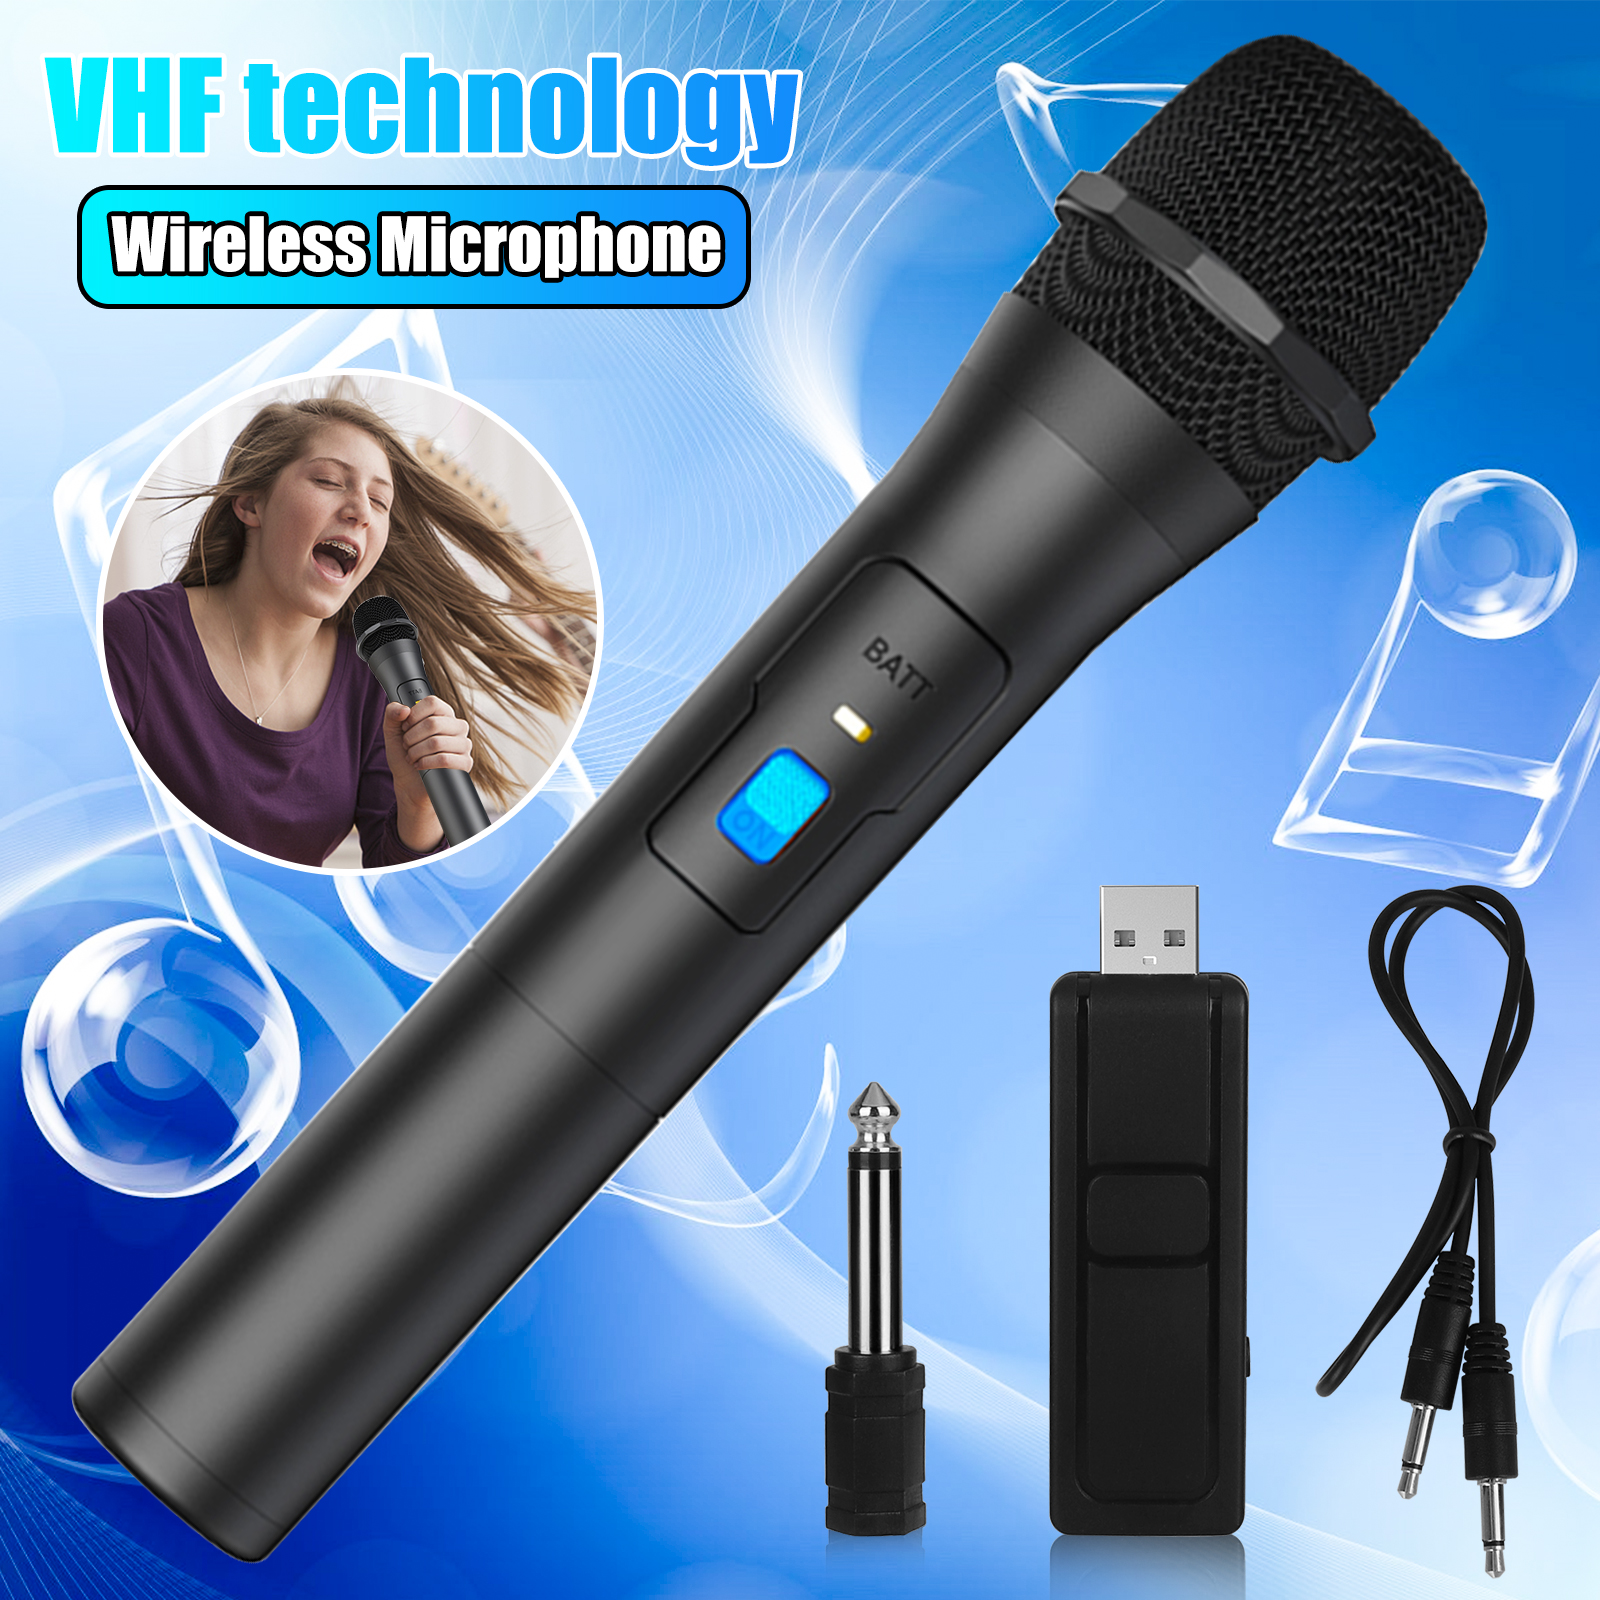 1Pc VHF Wireless Microphone, EEEkit Portable Dynamic Mic, Handheld Karaoke Mic with 3.5mm to 6.35mm Receiver for Business Meetings, Sing, Speech - image 1 of 9